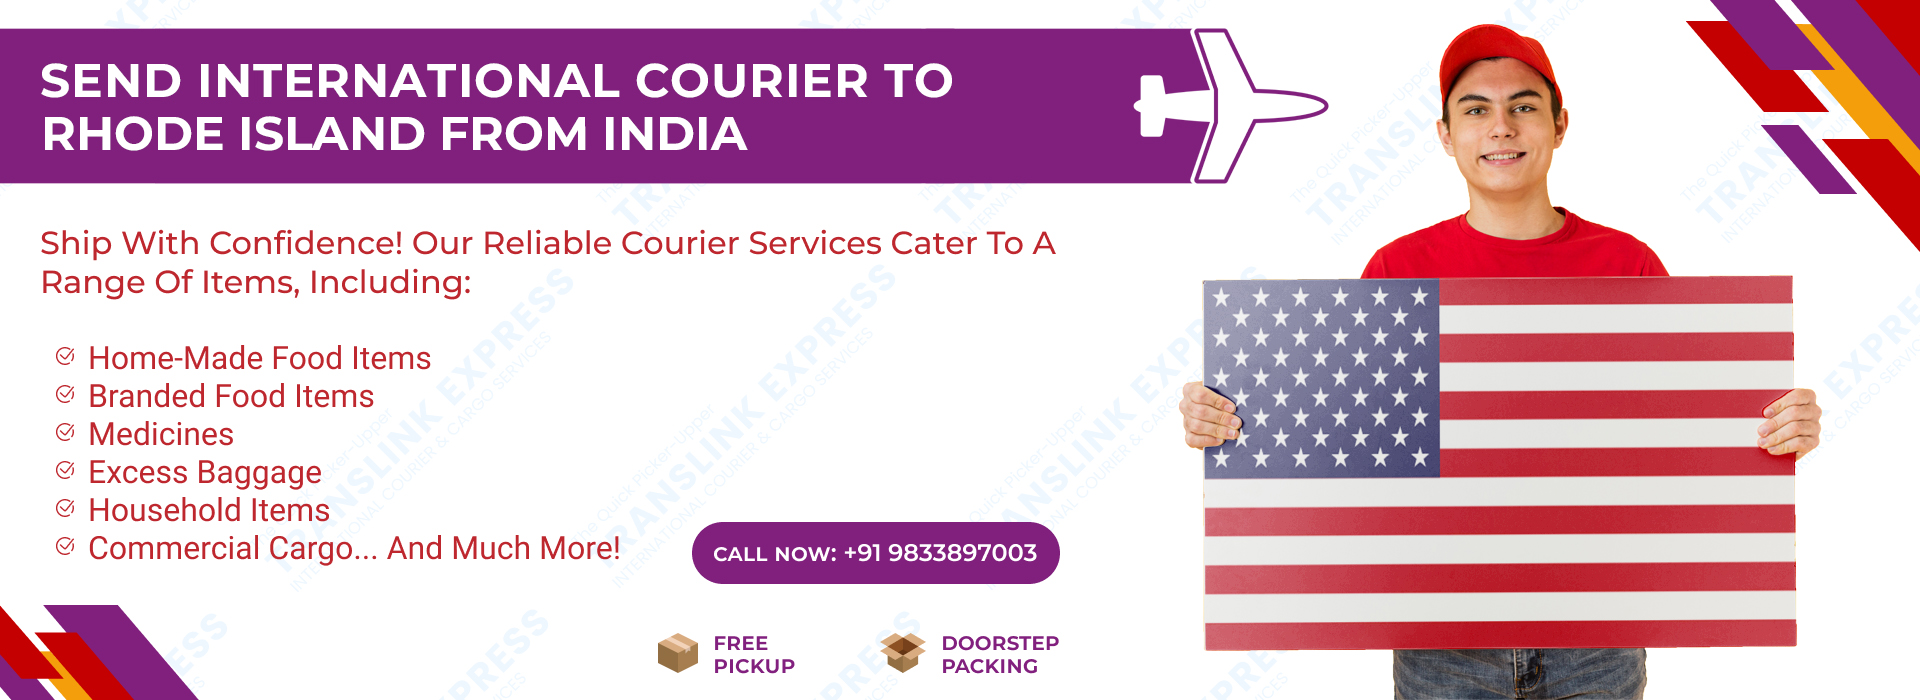 Courier to Rhode Island From India